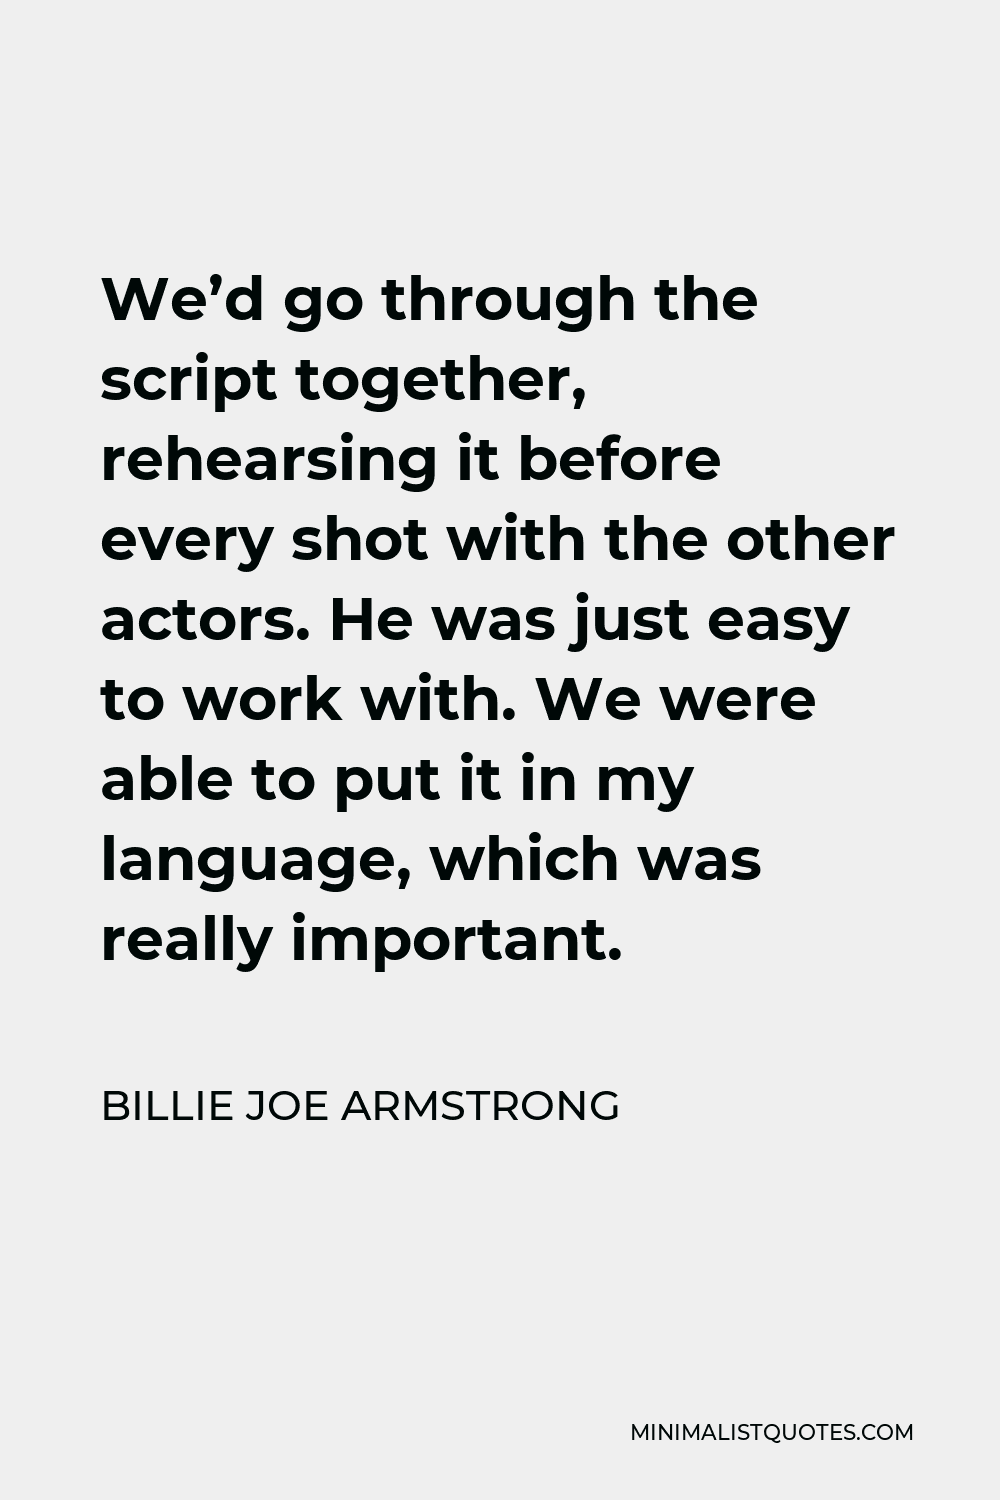 Billie Joe Armstrong Quote - We’d go through the script together, rehearsing it before every shot with the other actors. He was just easy to work with. We were able to put it in my language, which was really important.